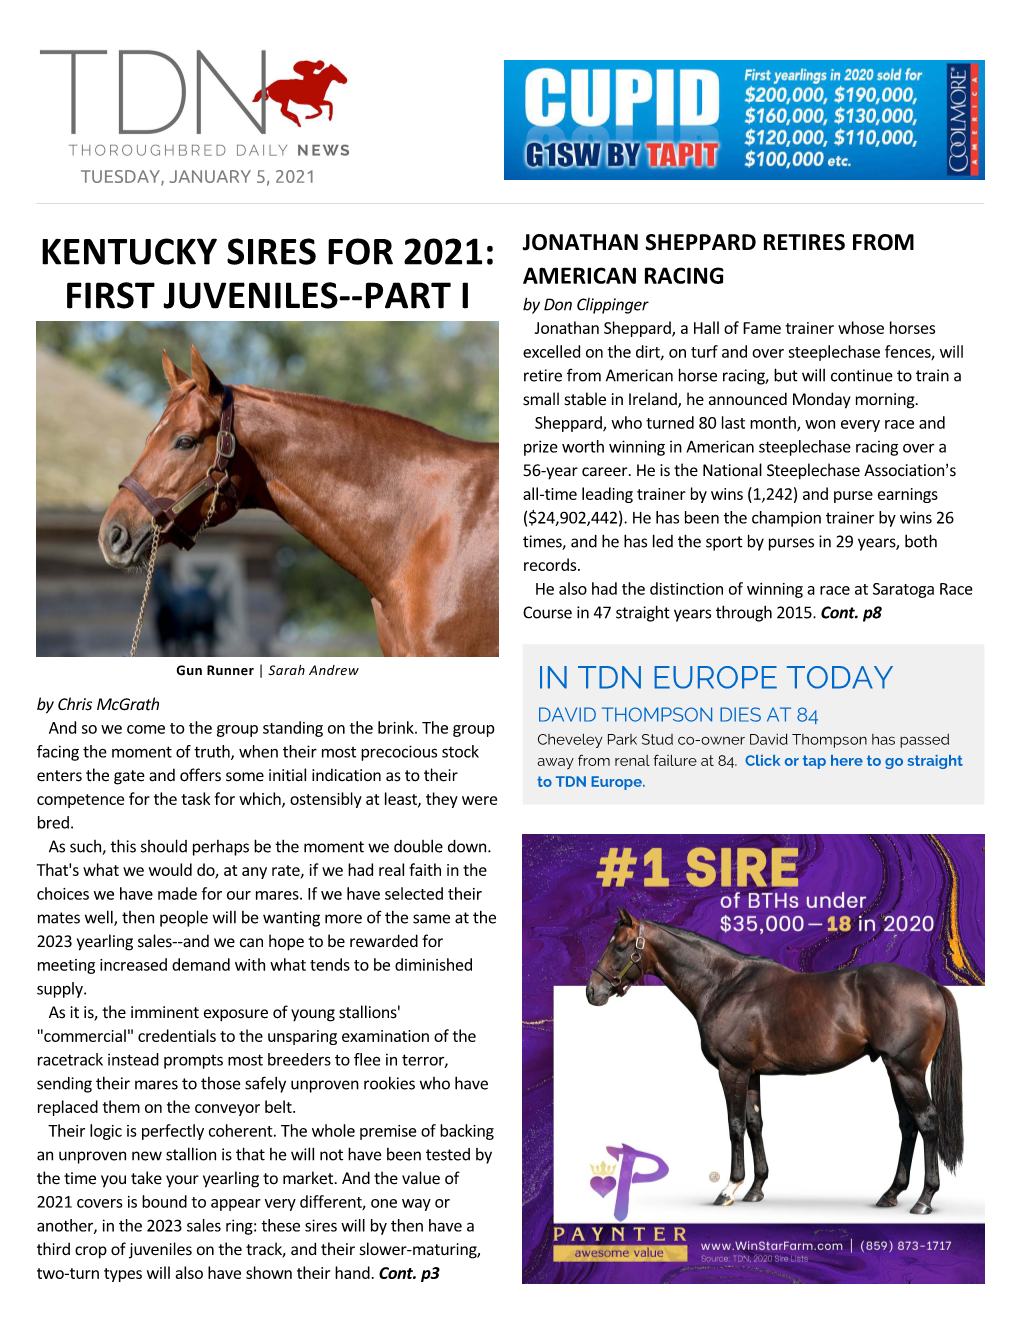 TDN AMERICA TODAY Cheveley Park Stud Itself Is Home to a Six-Strong Stallion Roster JONATHAN SHEPPARD RETIRES from U.S